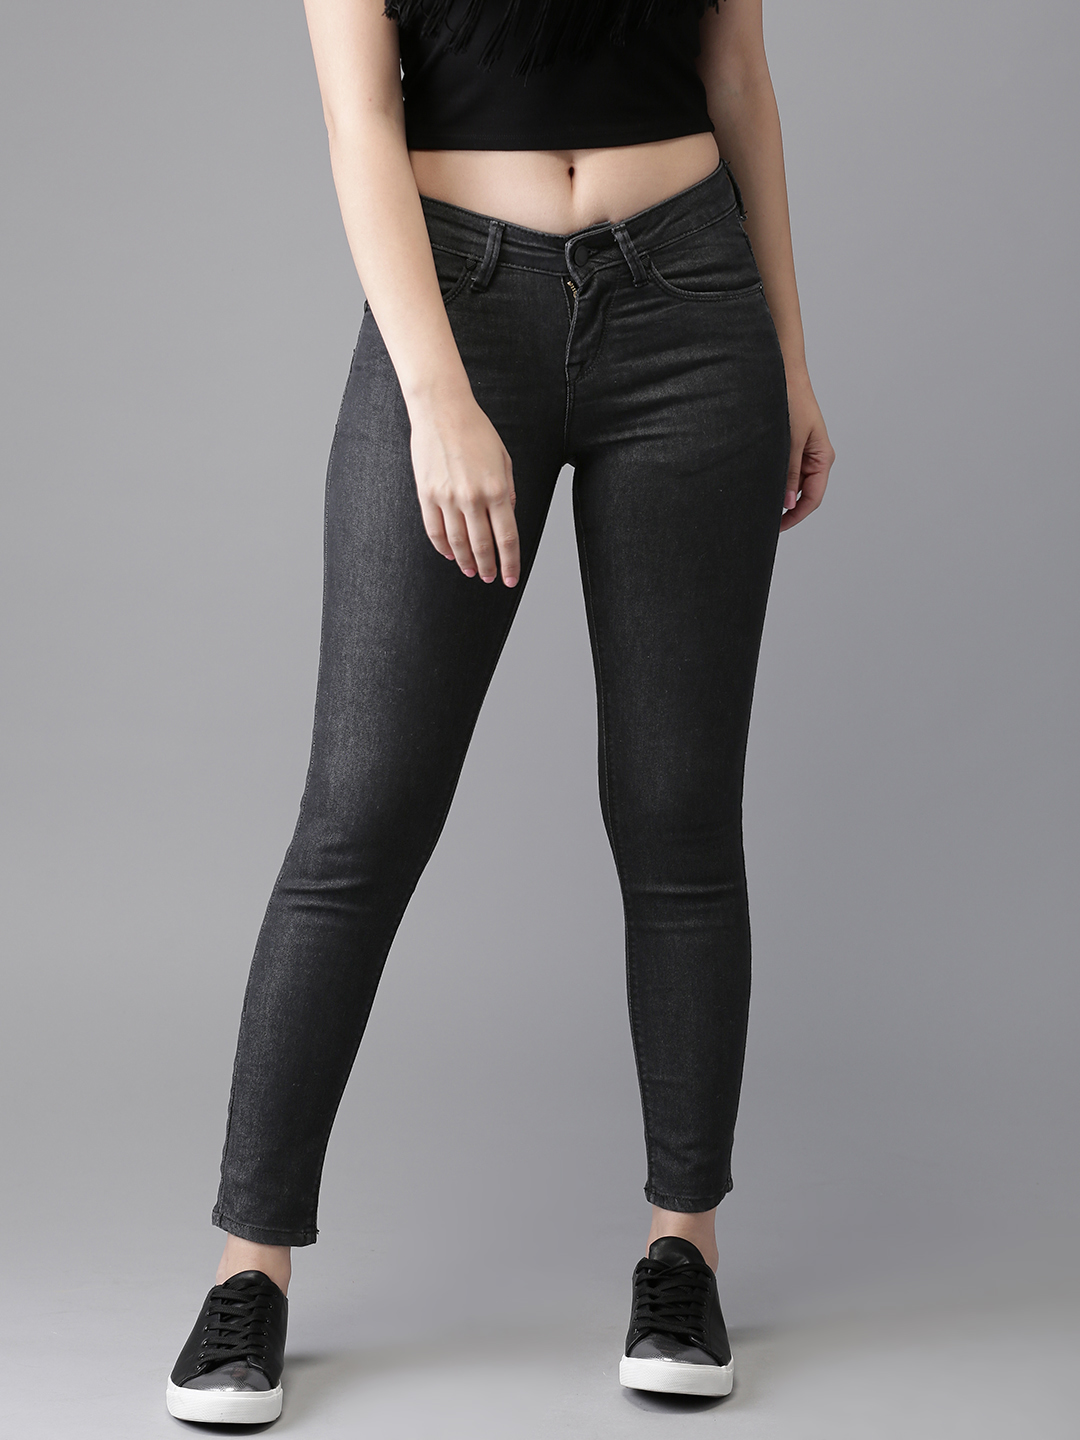 HERE&NOW Women Charcoal Grey Skinny Fit Mid-Rise Ankle Length Clean Look Stretchable Jeans Price in India